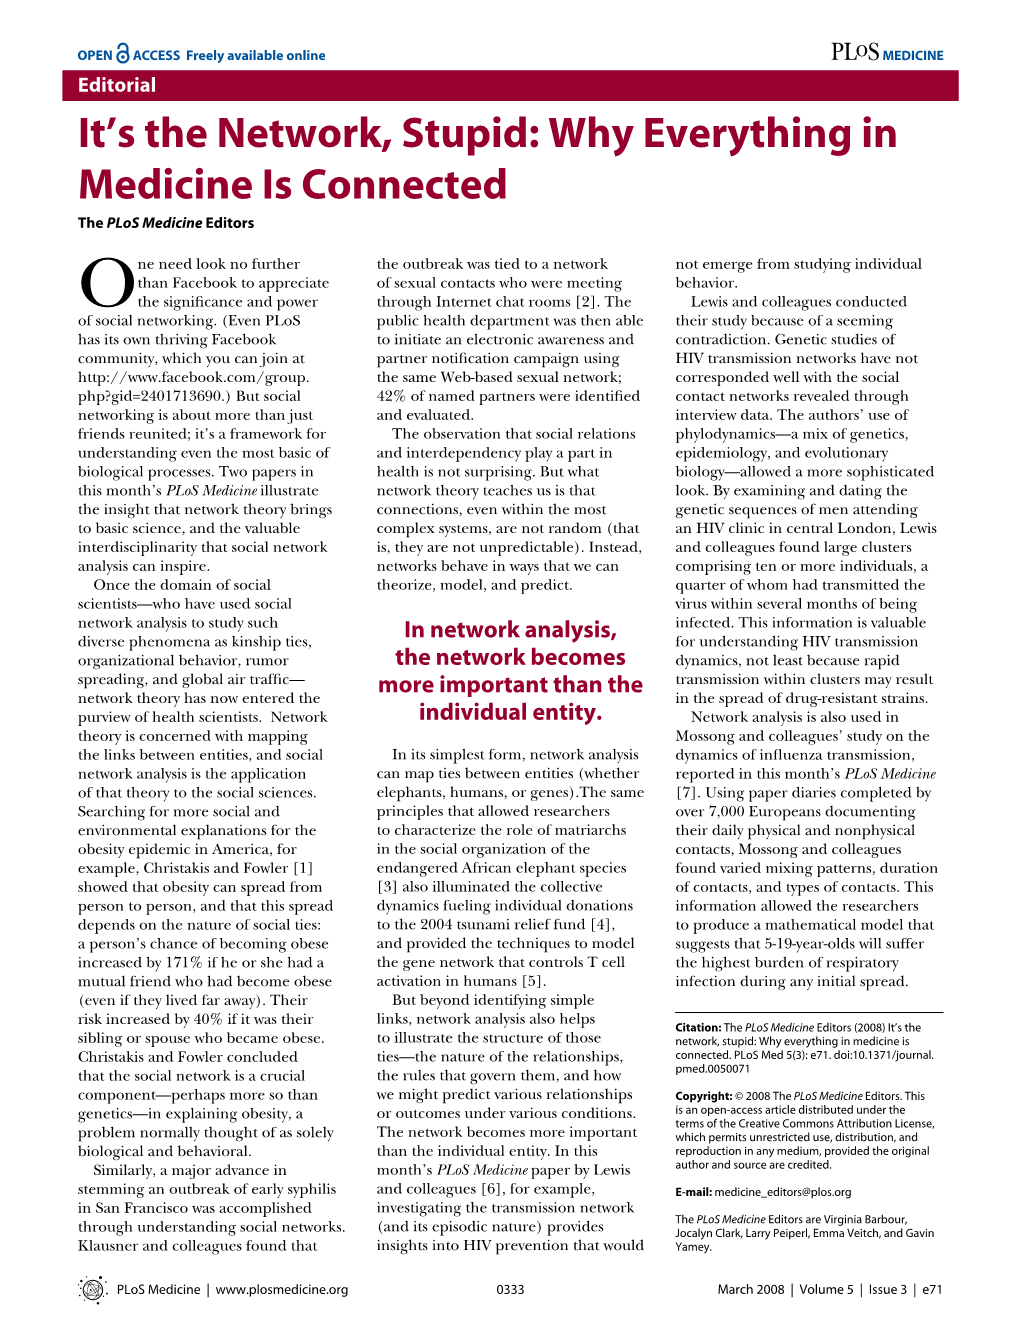 It's the Network, Stupid: Why Everything in Medicine Is Connected